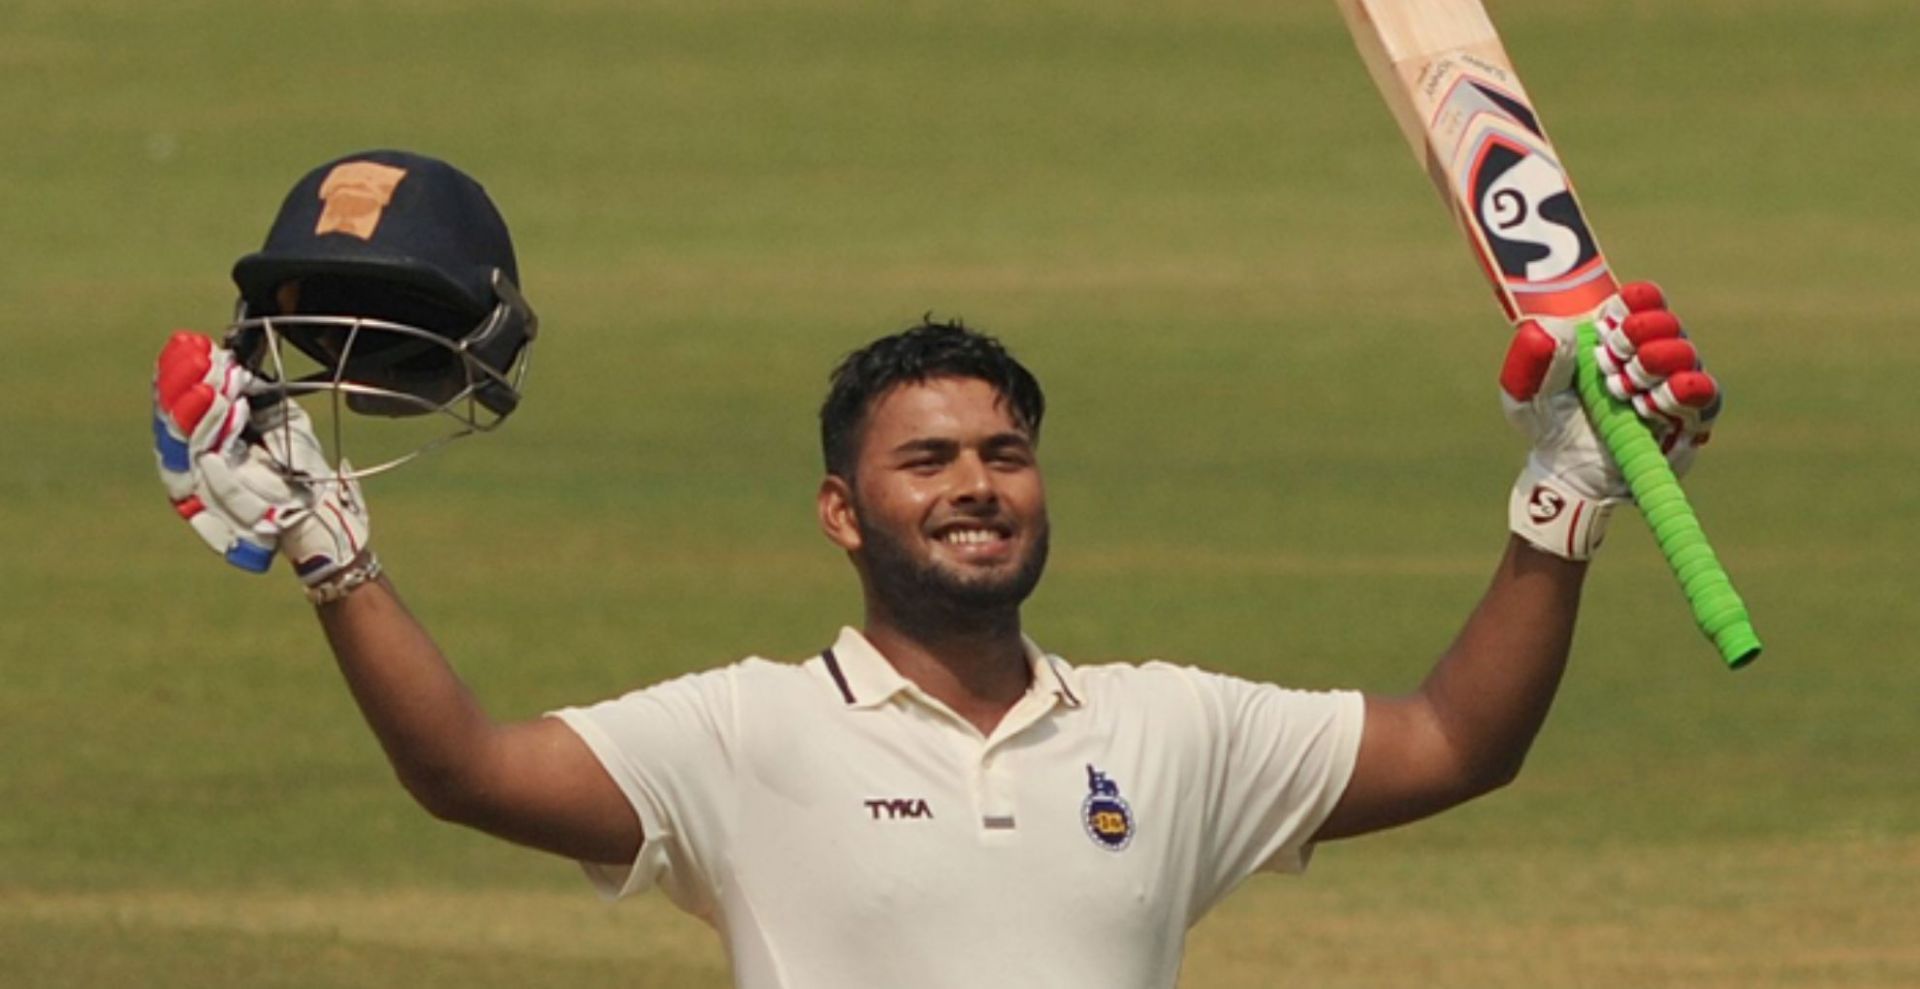 Rishabh Pant has a first-class triple century to his name. (Credits: Twitter)